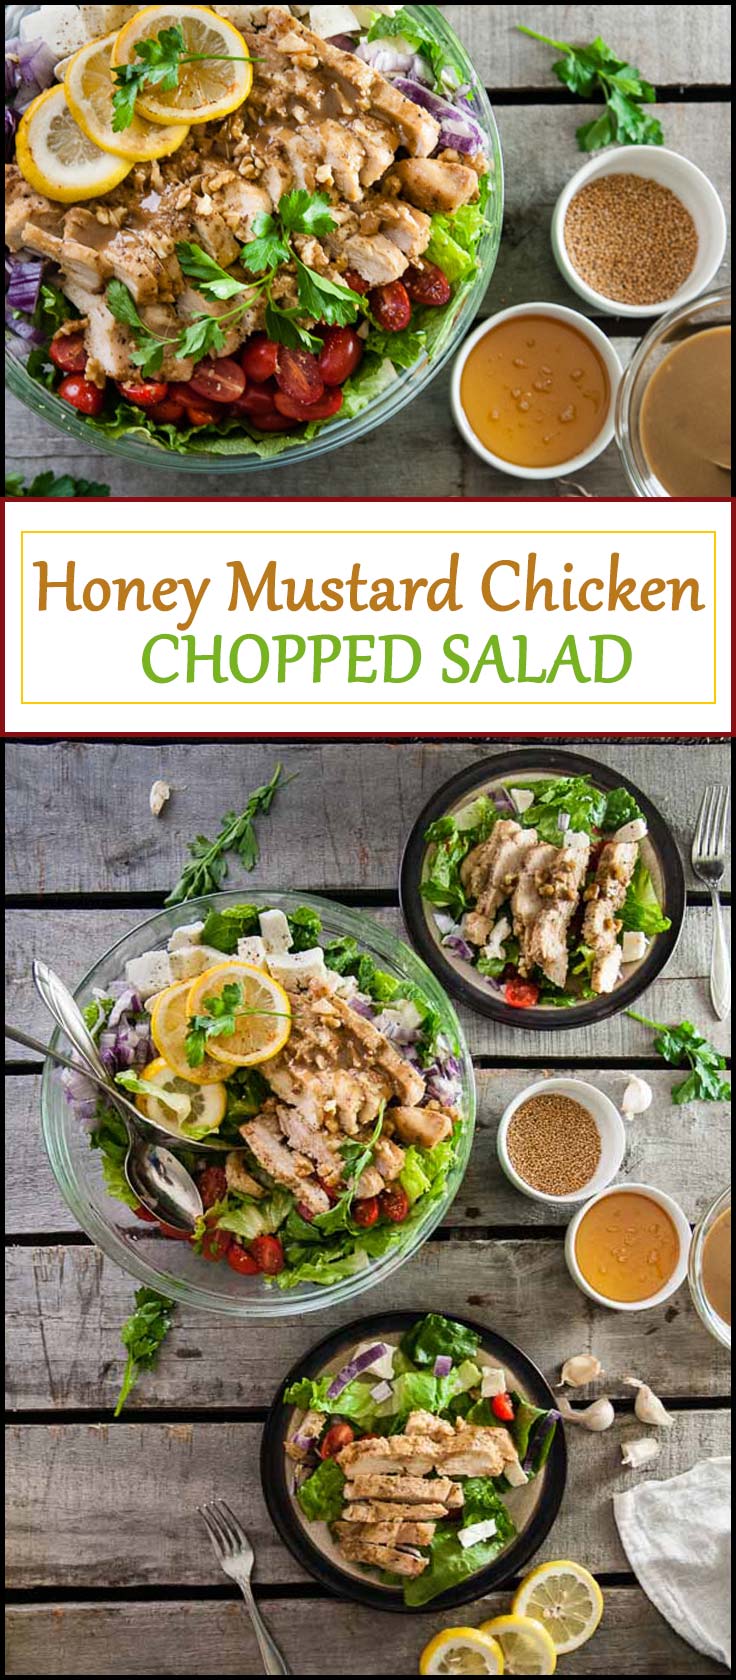 Honey Mustard Chicken Chopped Salad is a flavorful, healthy chicken recipe that tastes delicious over crisp salad for lunch or dinner from www.seasonedsprinkles.com